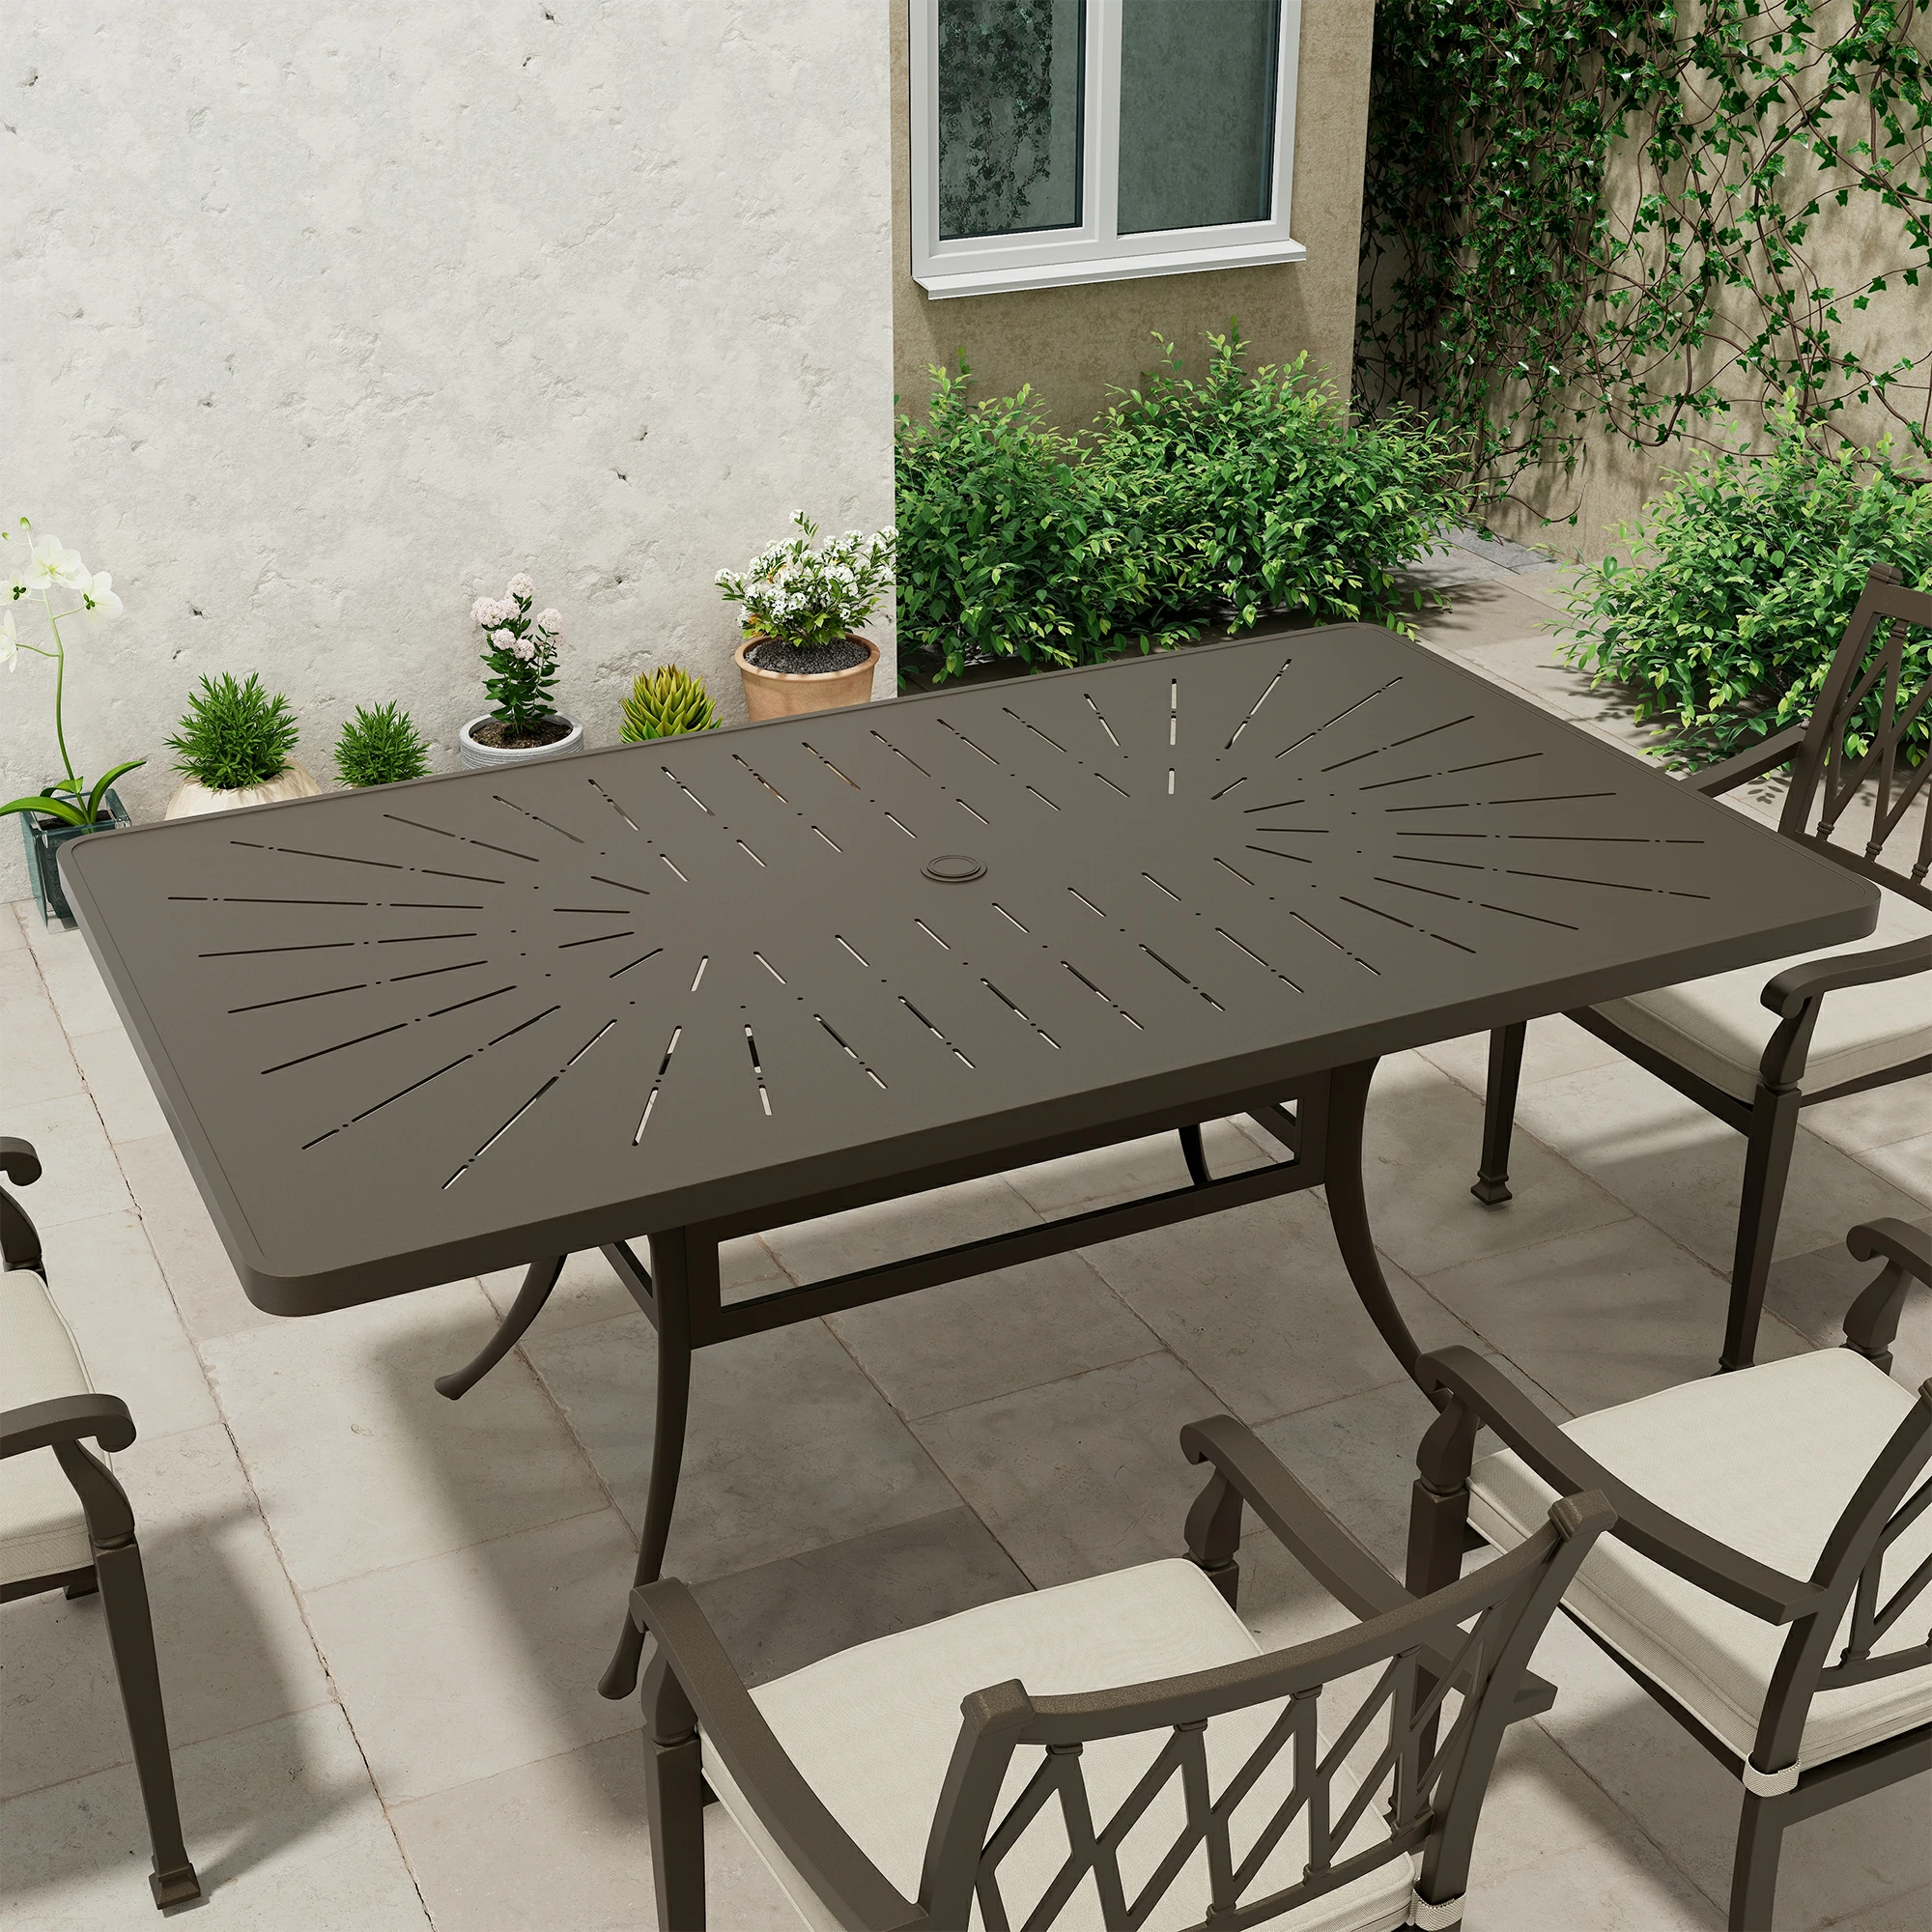 72 in. L x 42 in. W Cast Aluminum Rectangular Outdoor Dining Table with Umbrella Hole